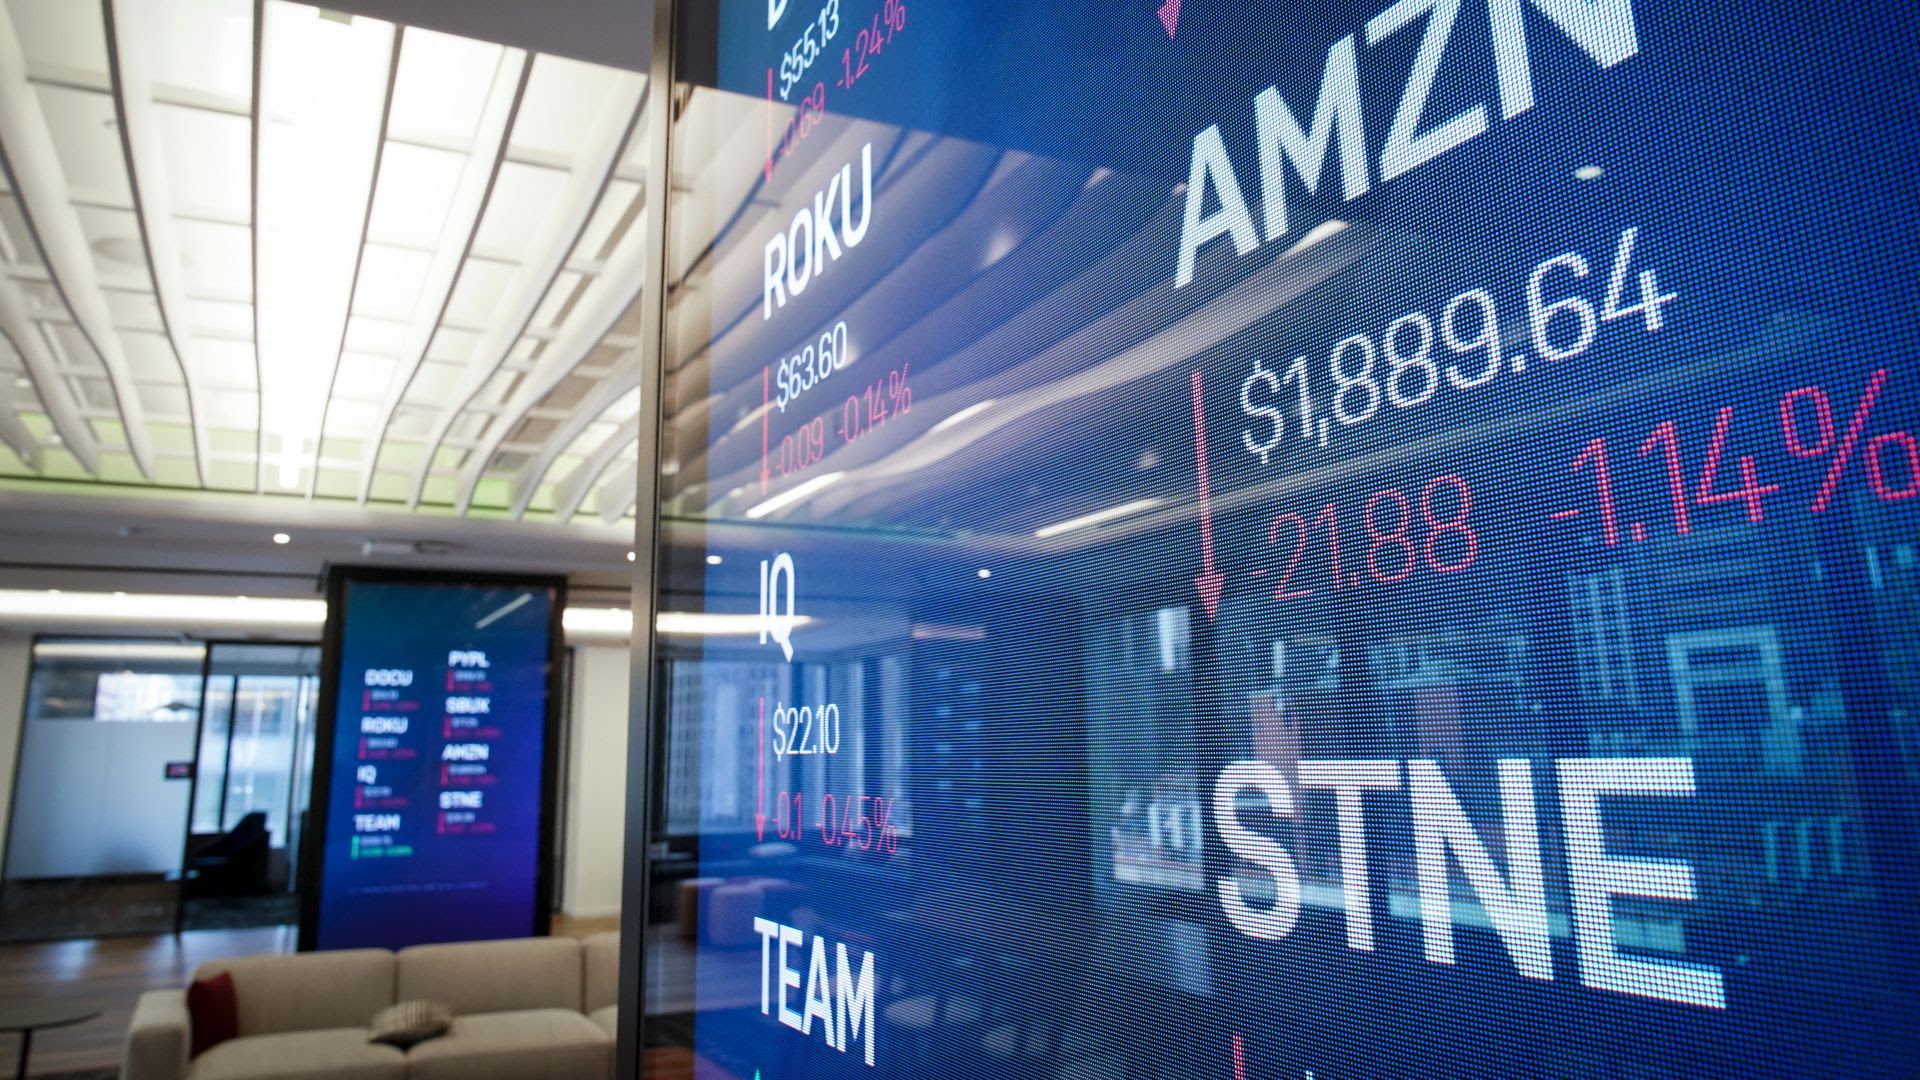 Stock information is displayed on a monitor at Nasdaq's office in Times Square. Photo: Drew Angerer/Getty Images